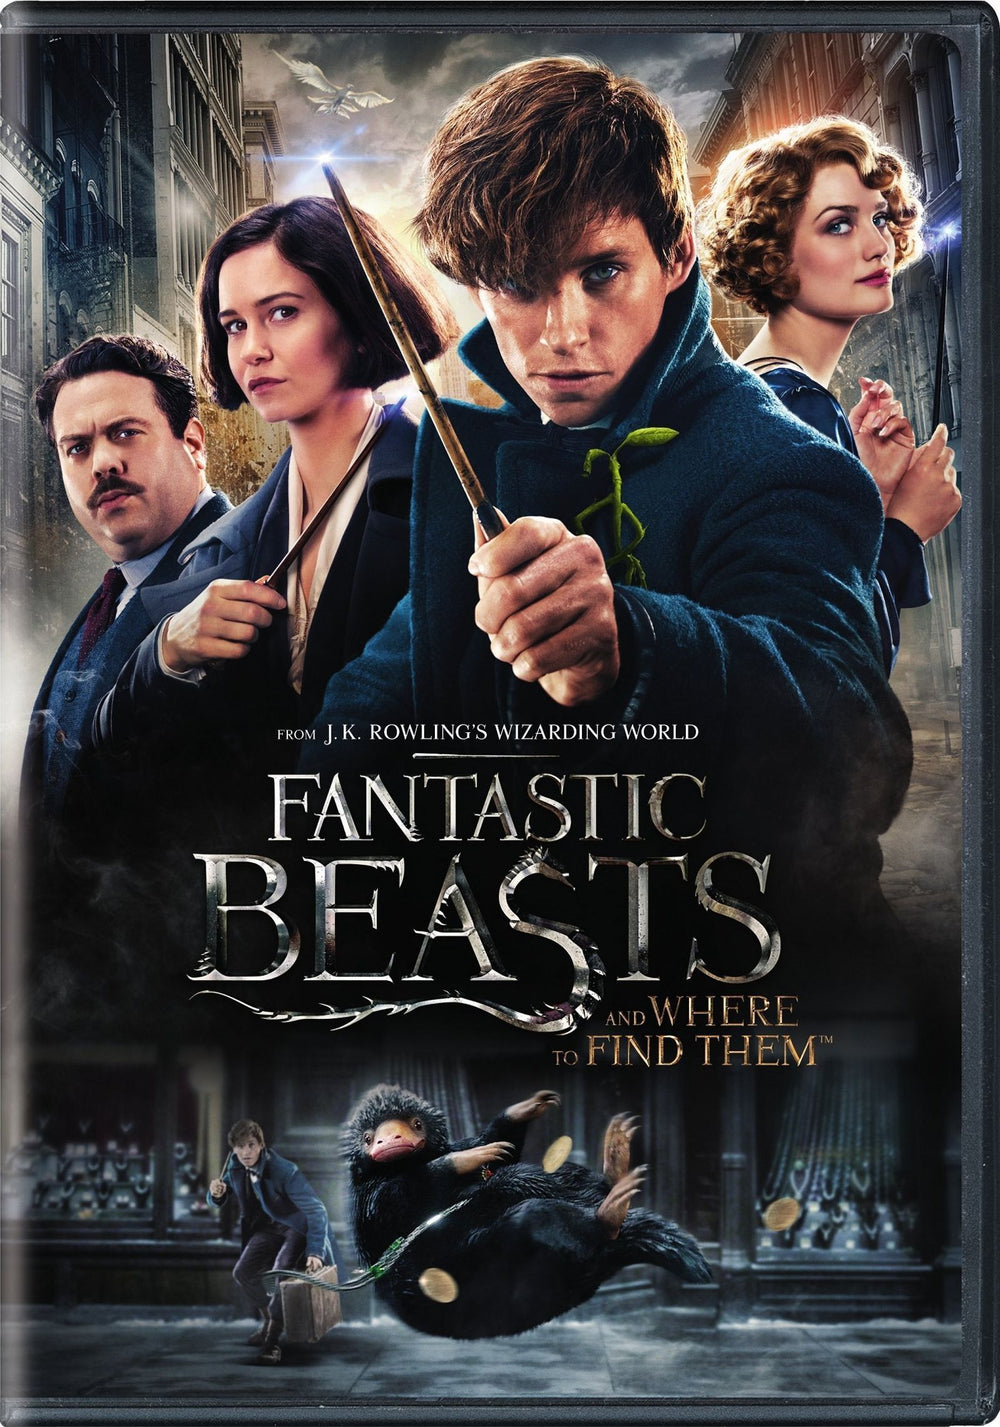 Fantastic Beasts and Where to Find Them 4K vudu/Itunes via Moviesanywhere